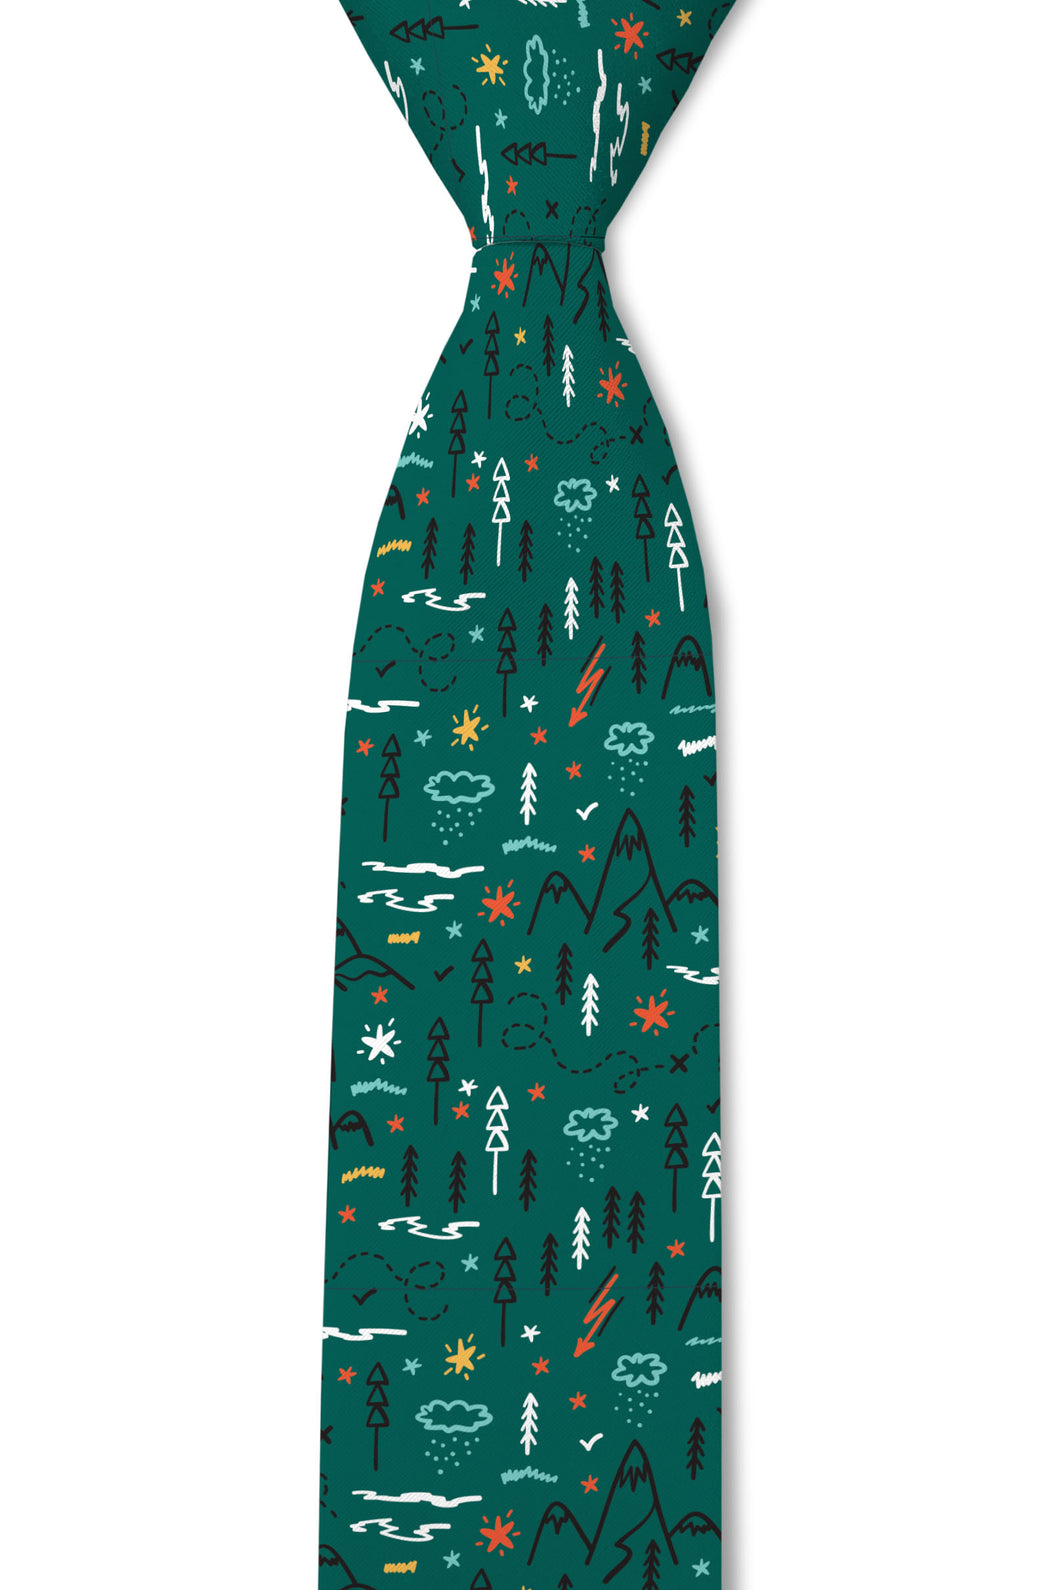 Great Outdoors missionary tie